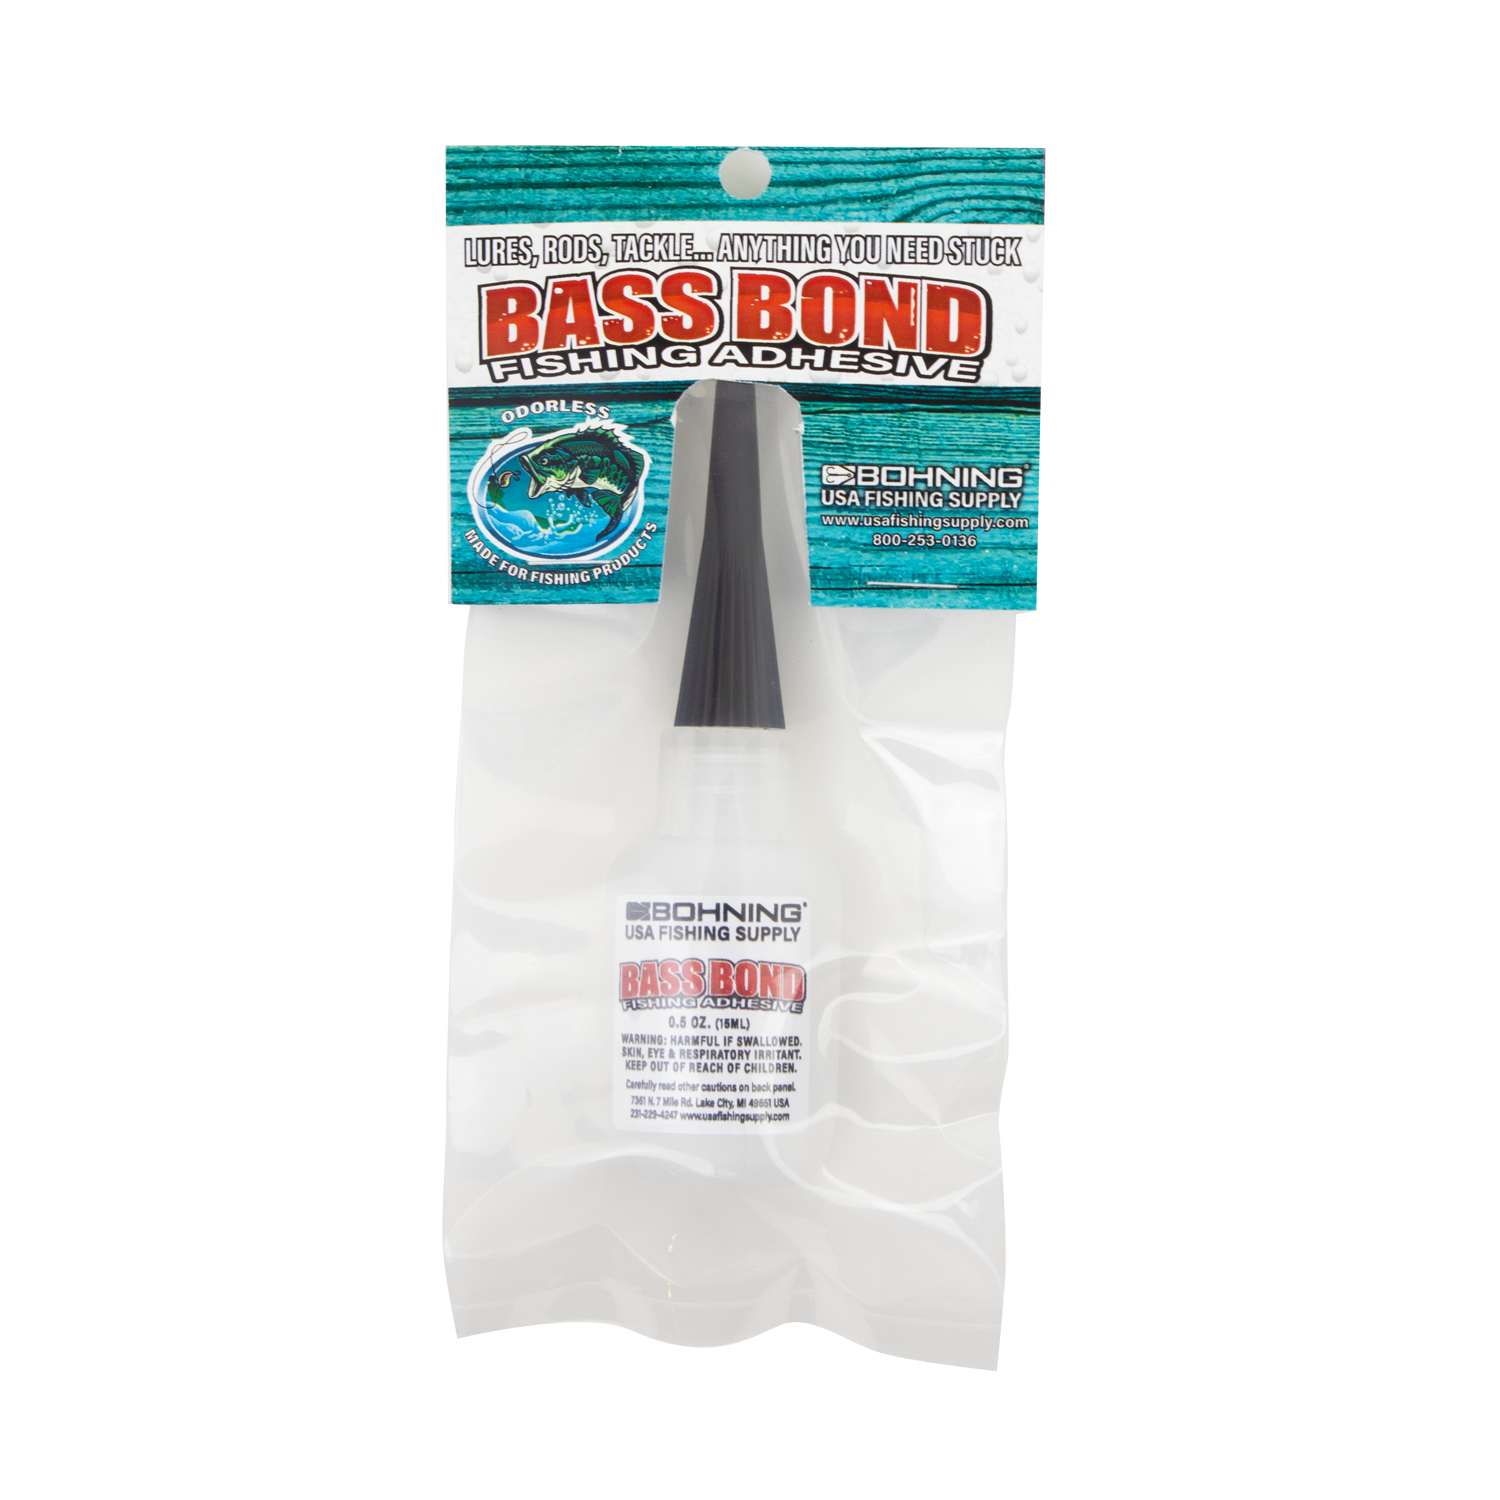 Fishing Tackle Glue, Fast Bonding Fishing Rod Glue, Suitable for all  fishing gear repairs such as bar and rope connection, fishing rod crack  repair